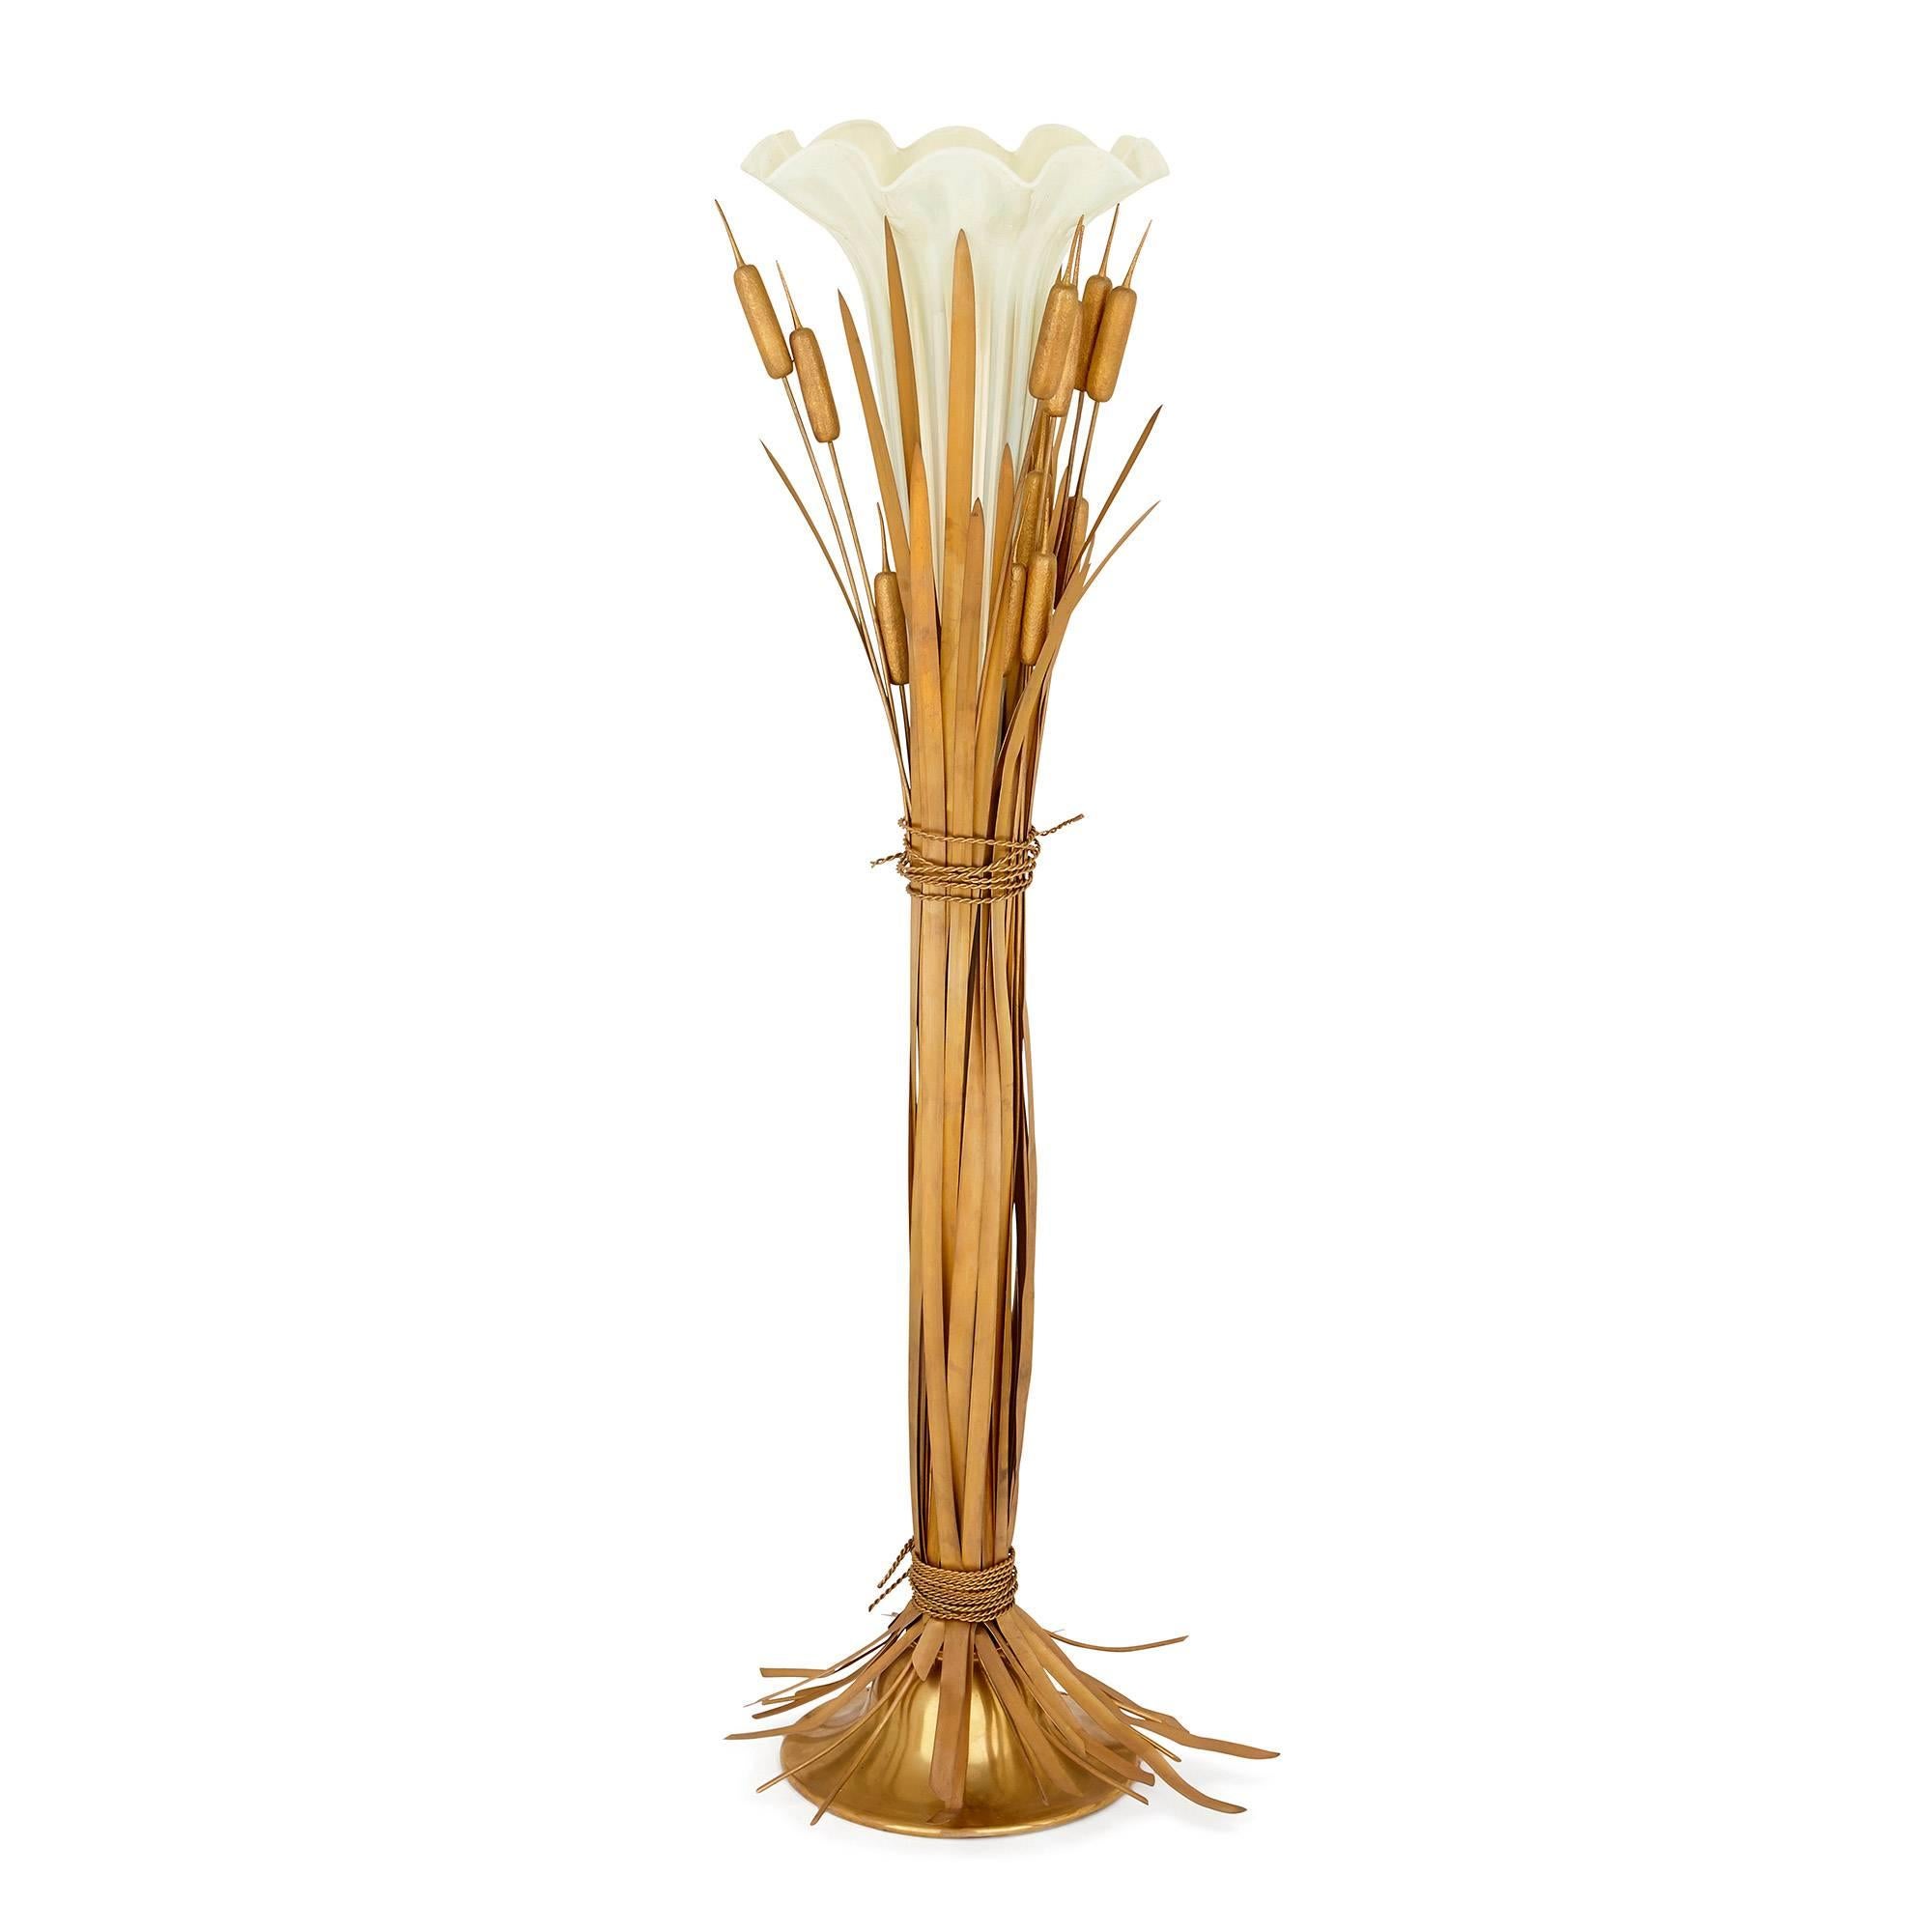 This stunning and large centrepiece is a beautiful piece with exquisite sculptural qualities. It is modelled as a central pale green opaline glass vase, delicately shaped as a long, slender flower head with a petal rim, with gilt brass reeds and